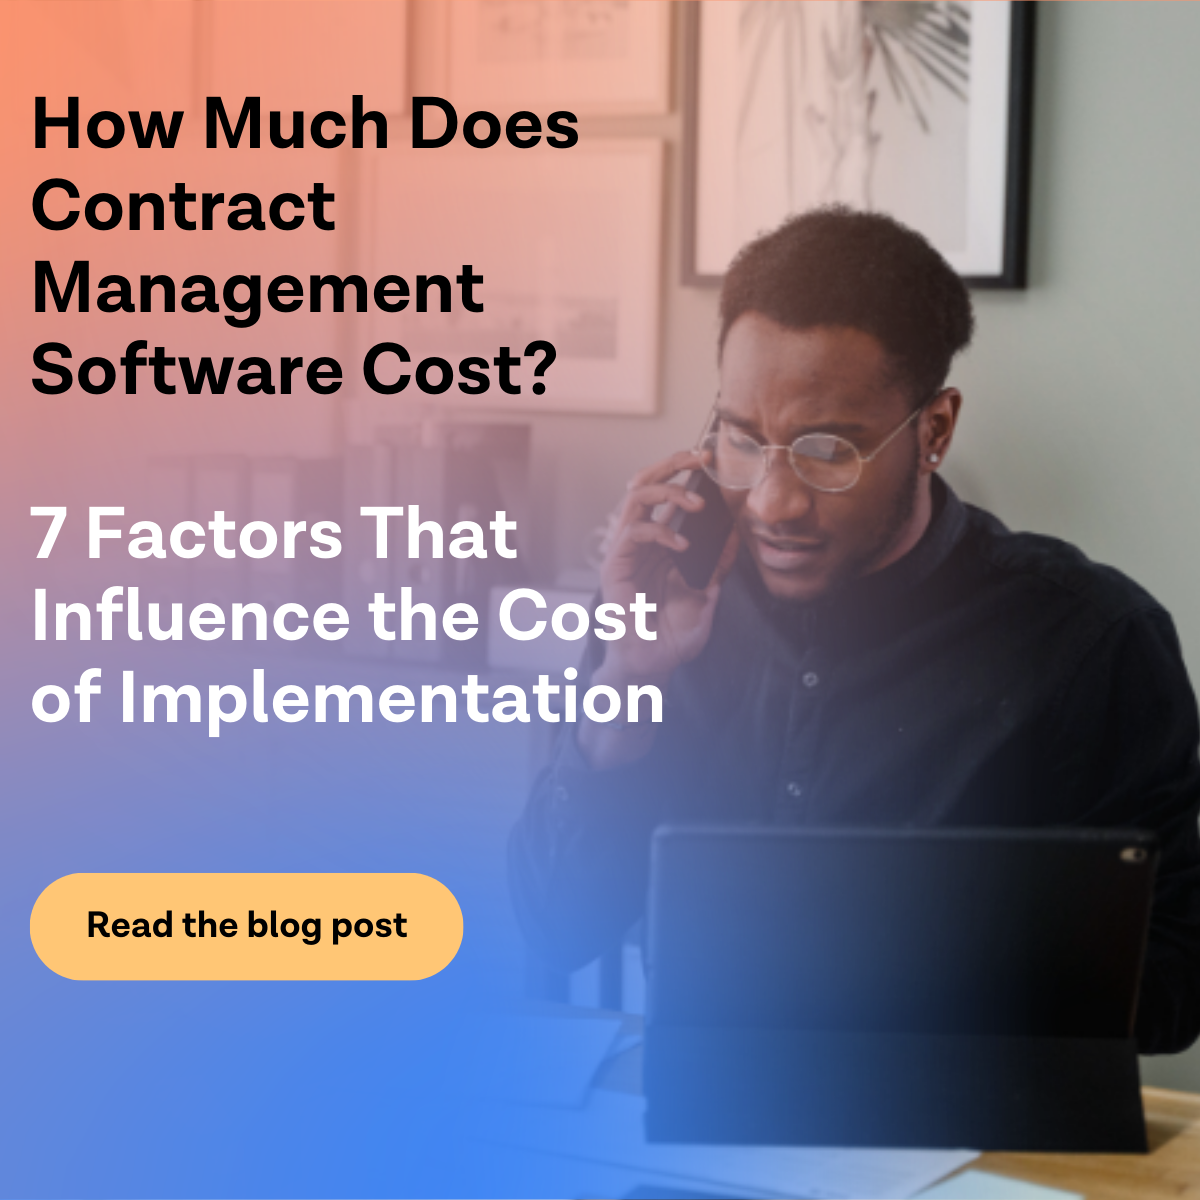 man holding phone discussing cost of contract management software